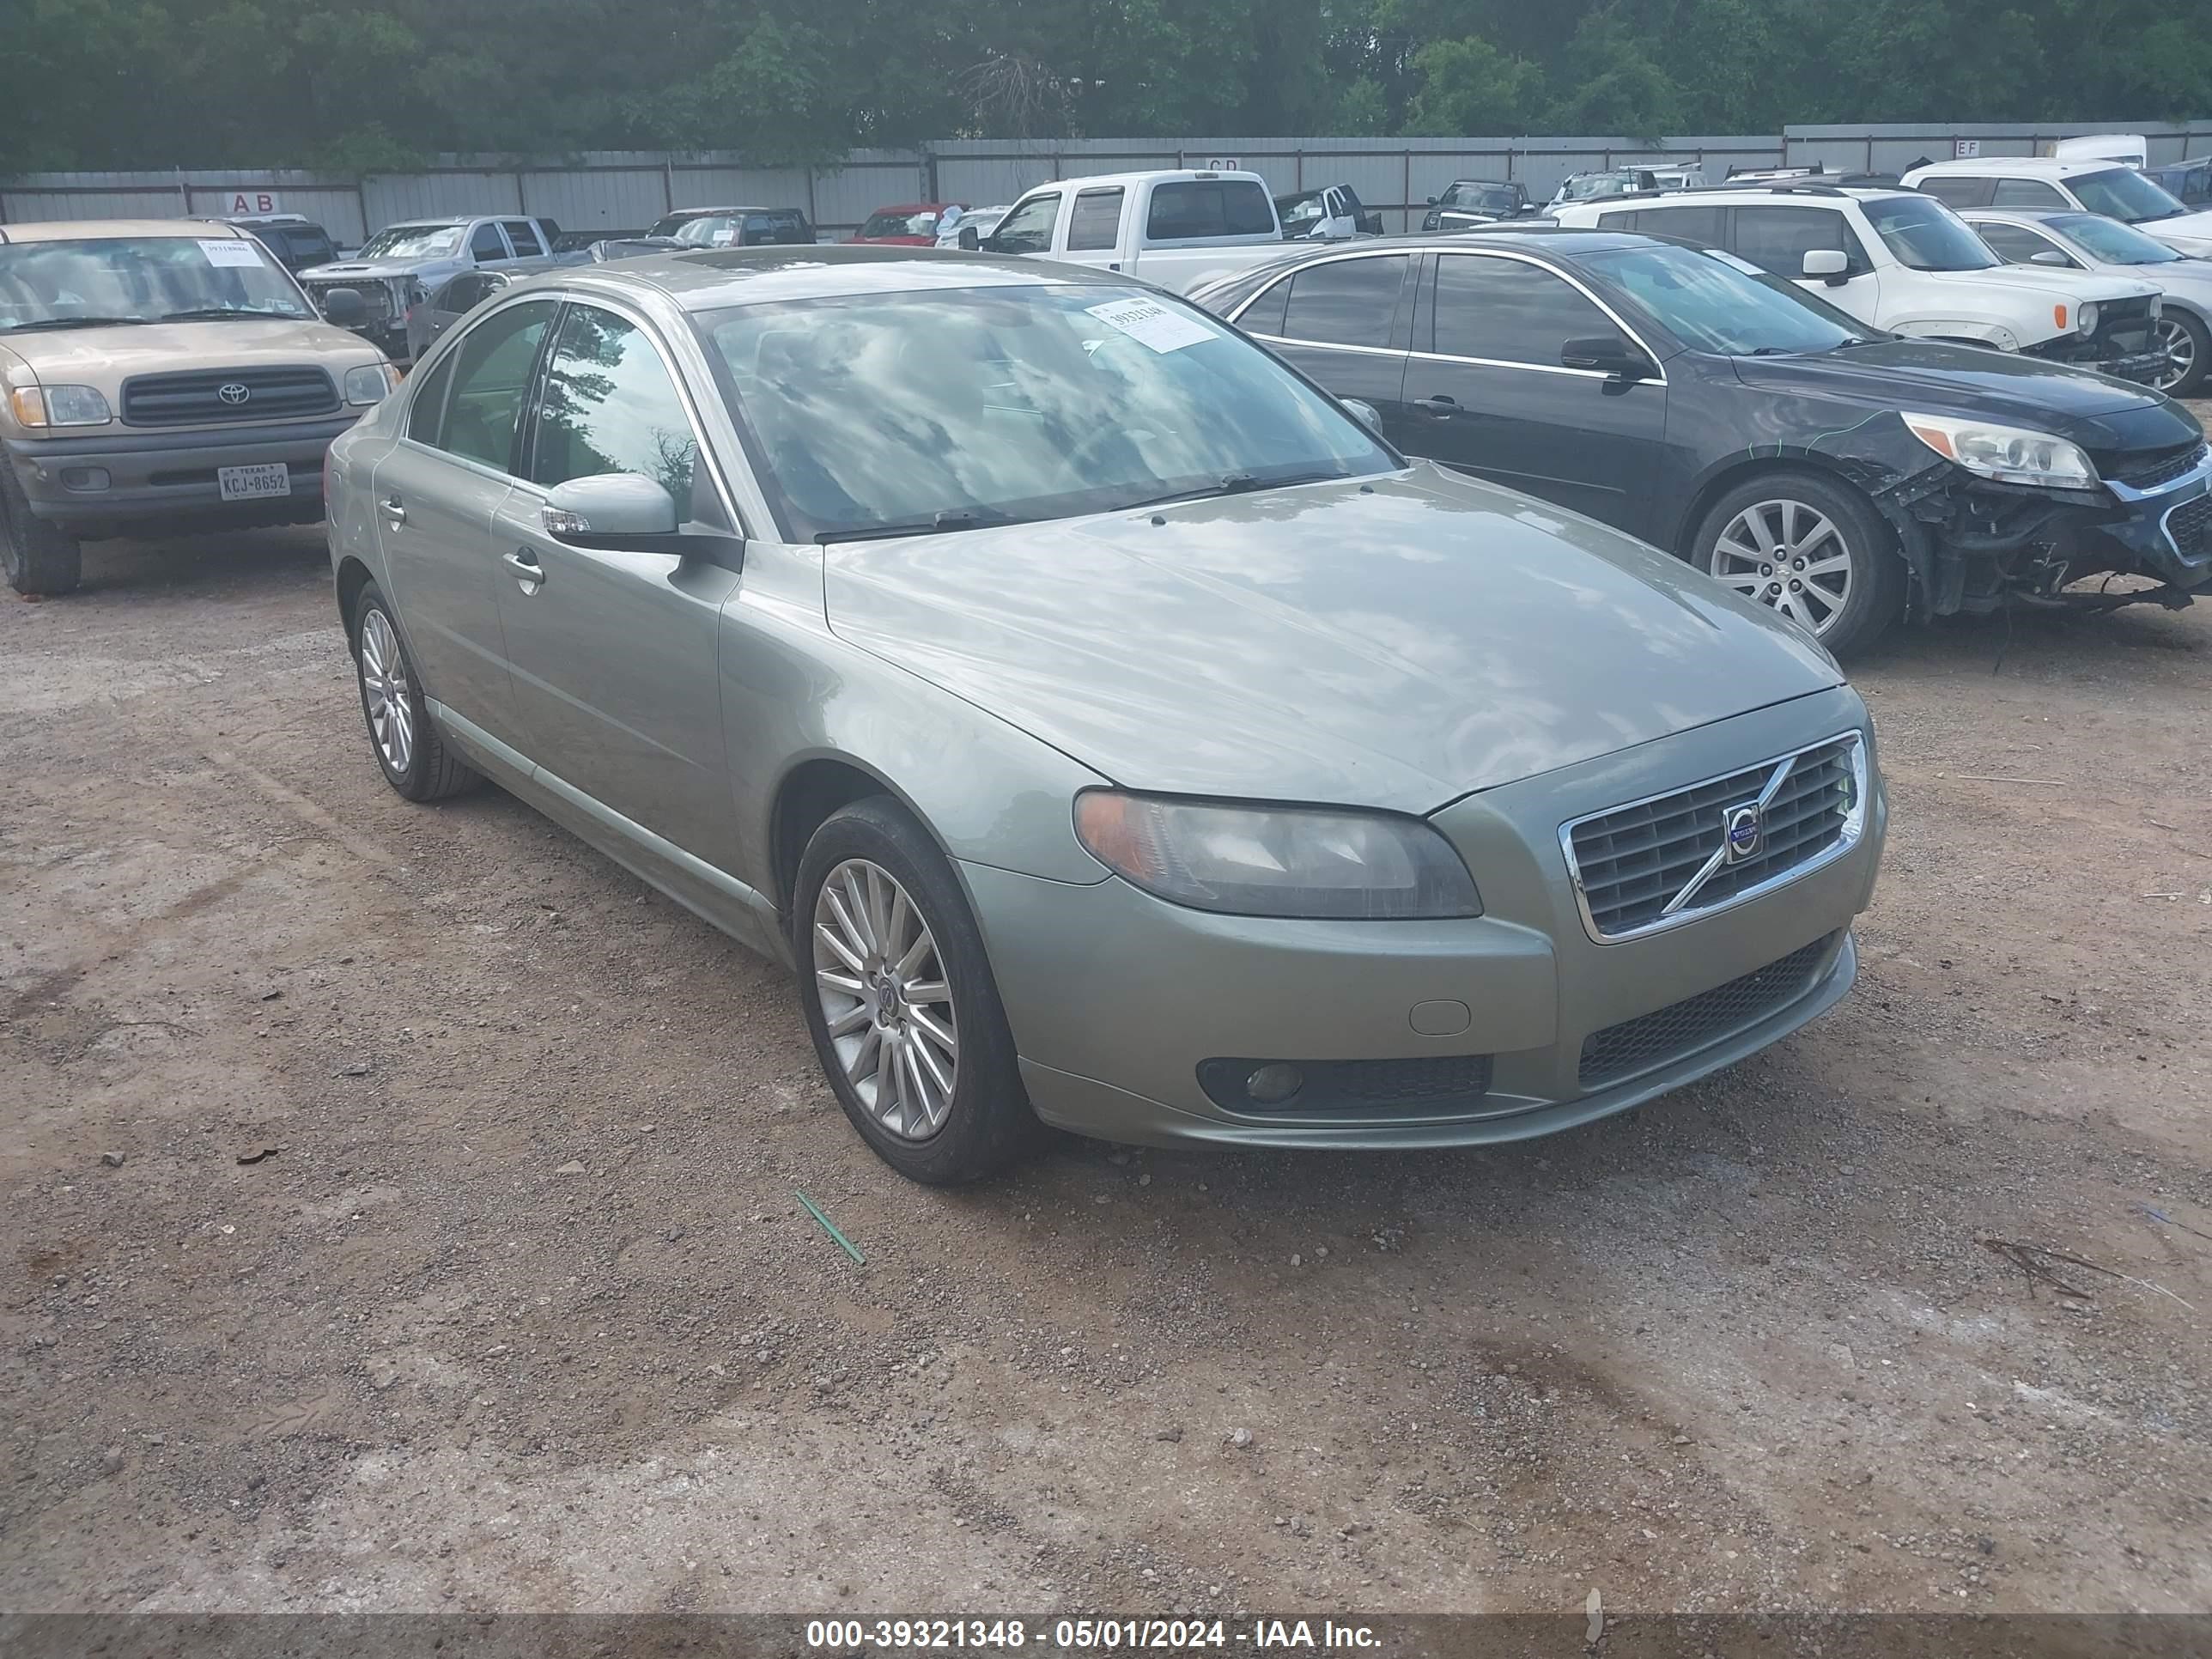 volvo s80 2007 yv1as982971040925